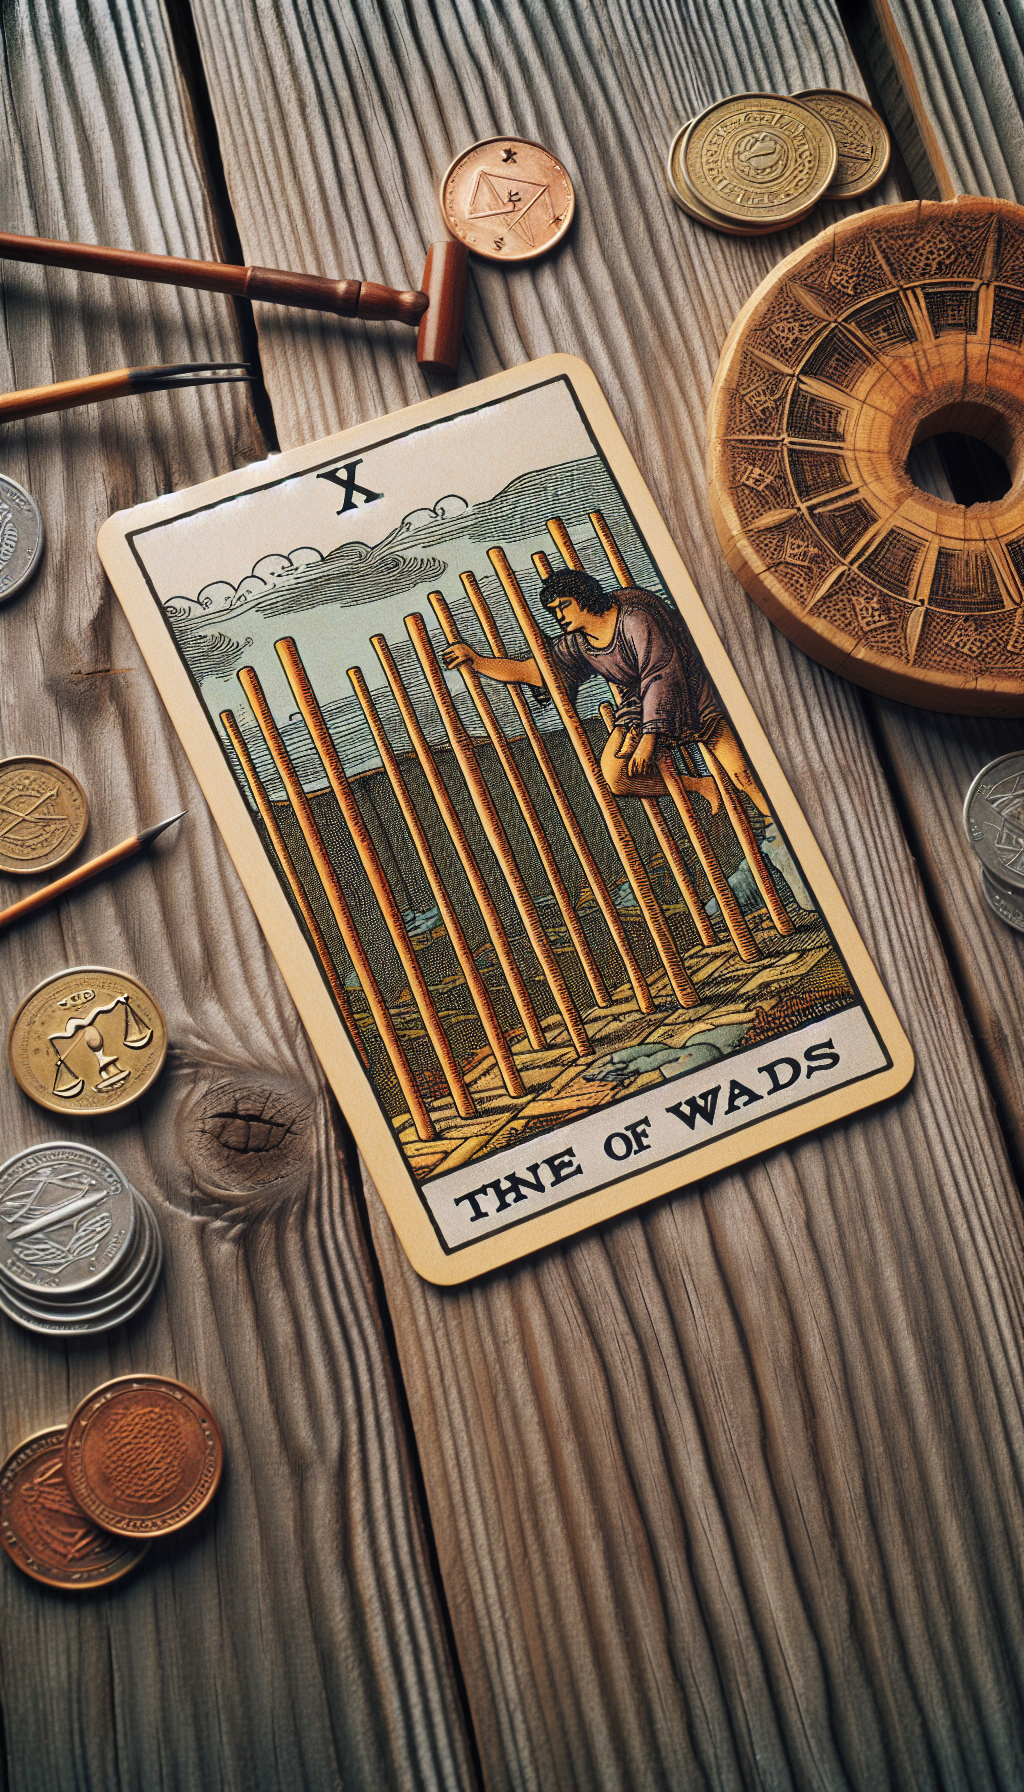 Navigating Financial Obstacles: Nine of Wands in Finances